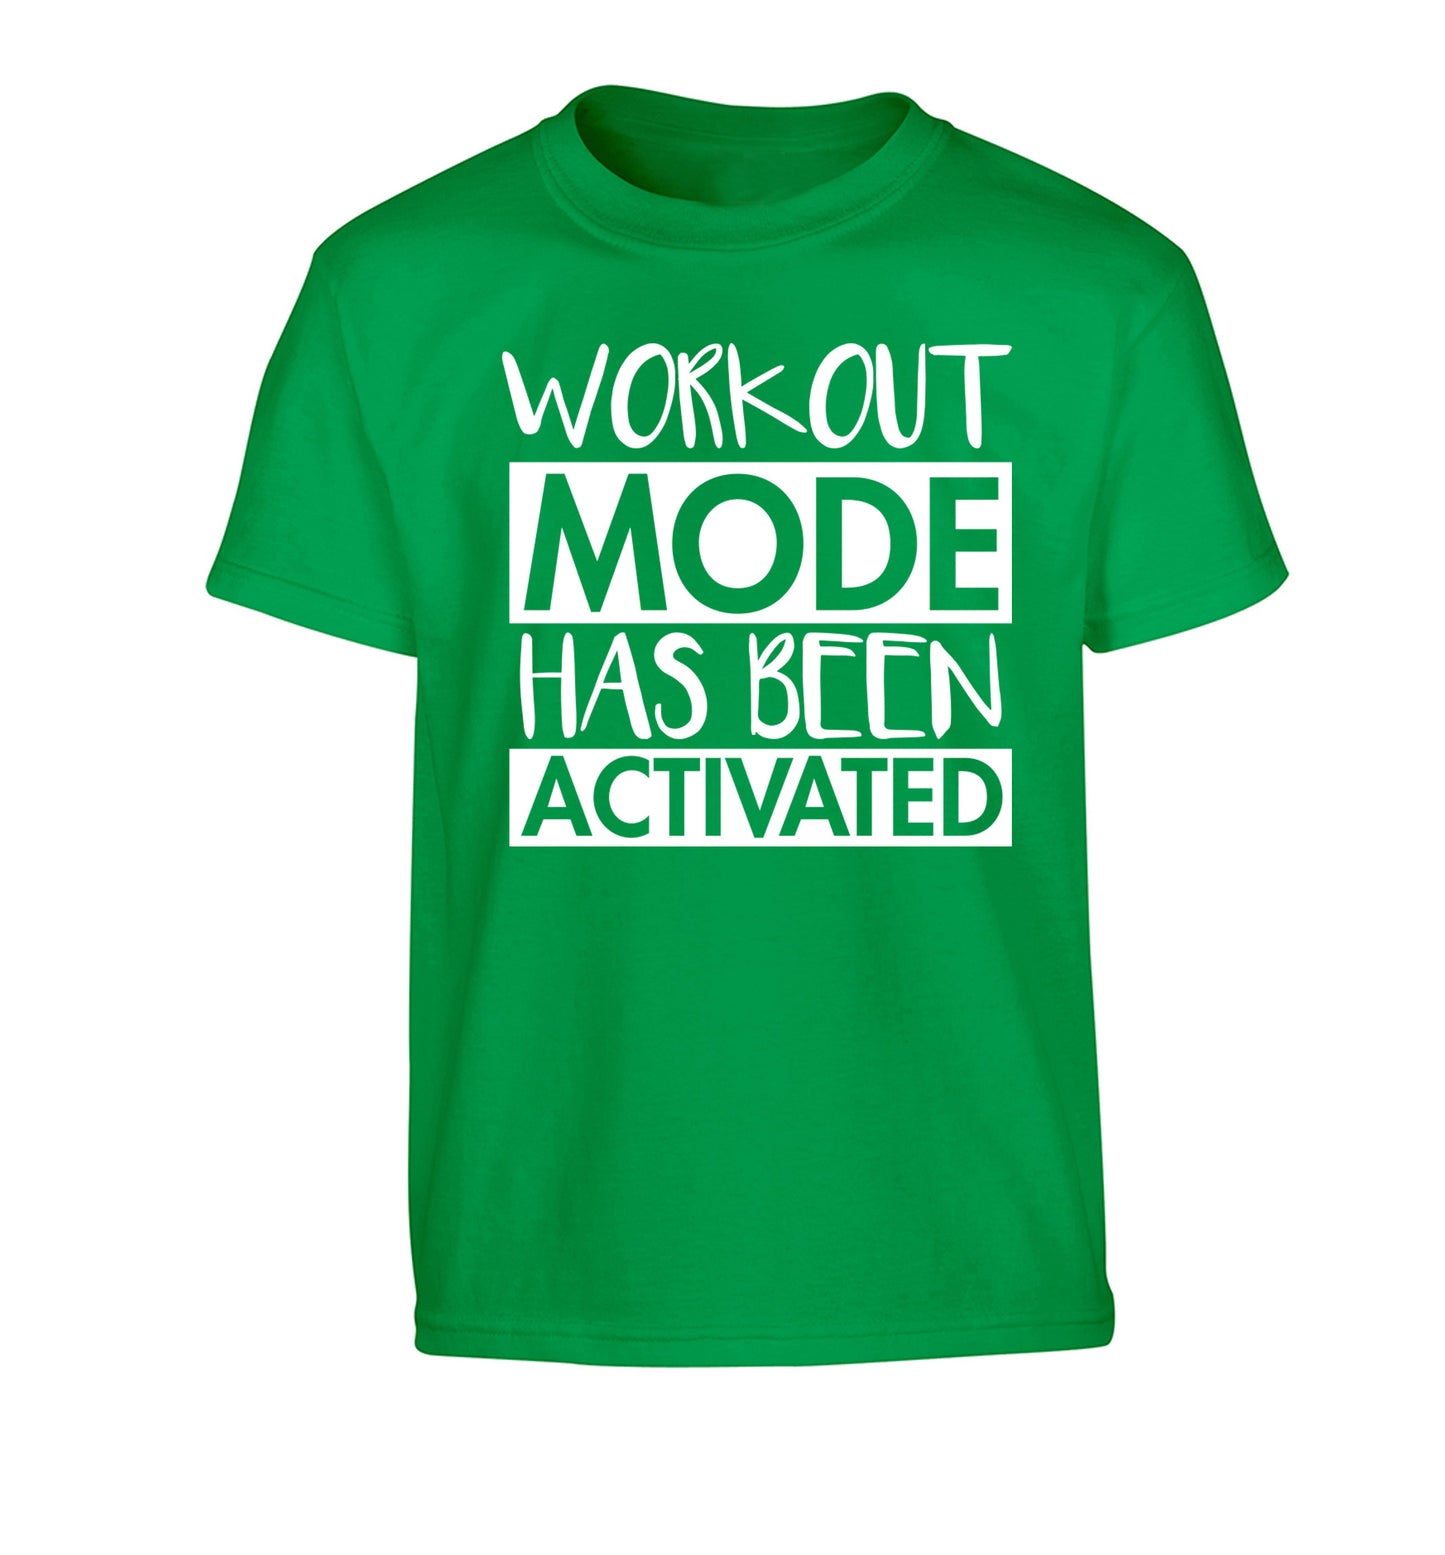 Workout mode has been activated Children's green Tshirt 12-14 Years